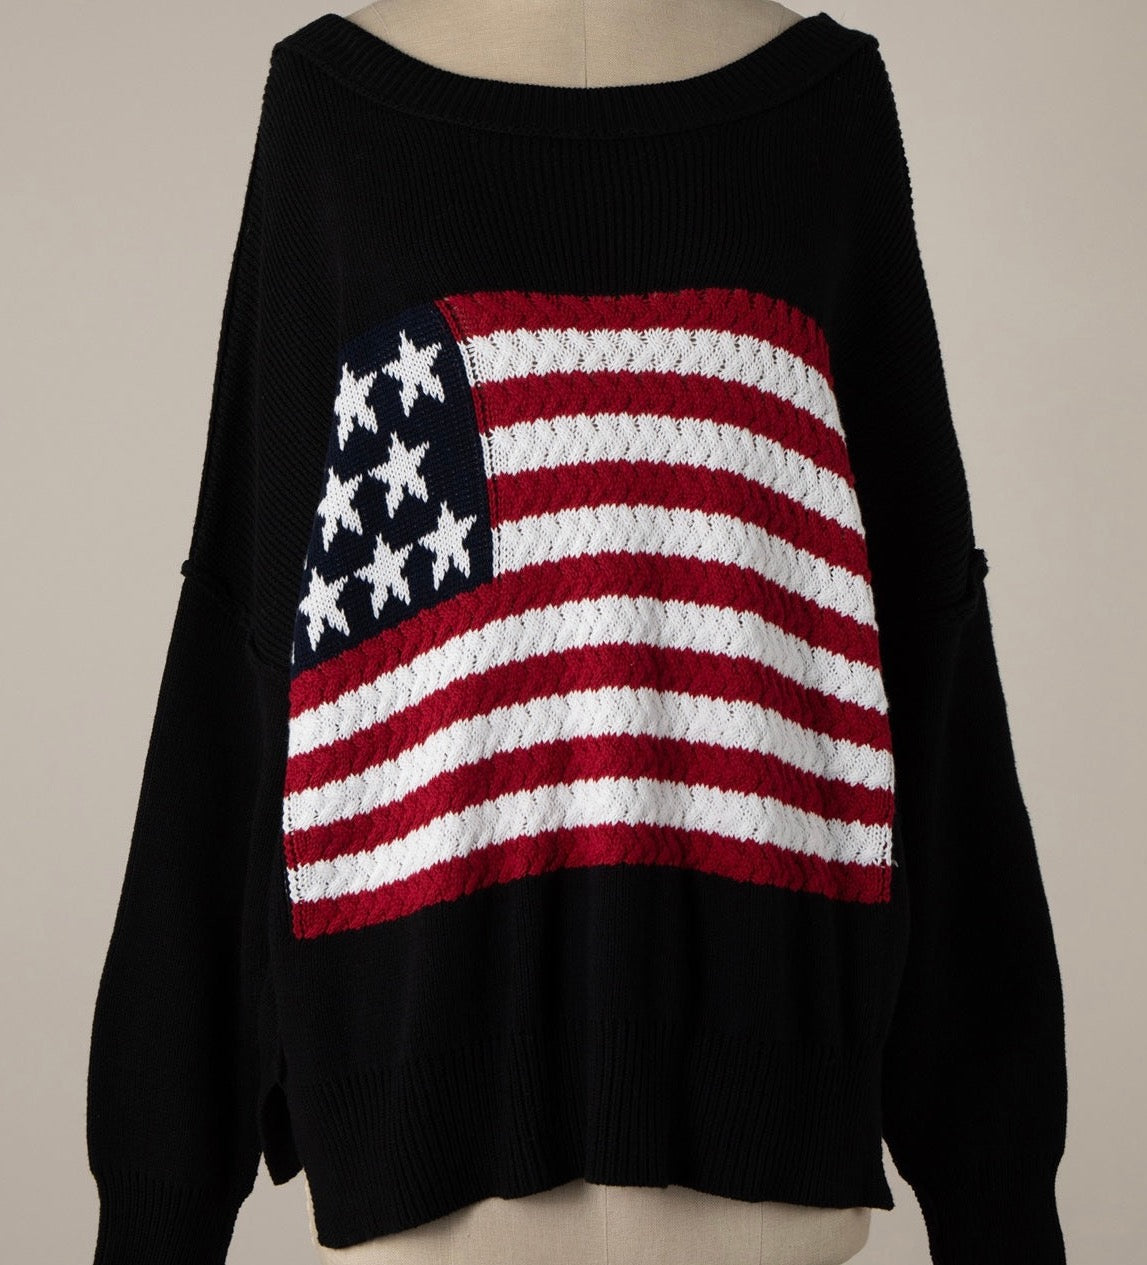 Party in the USA Sweater